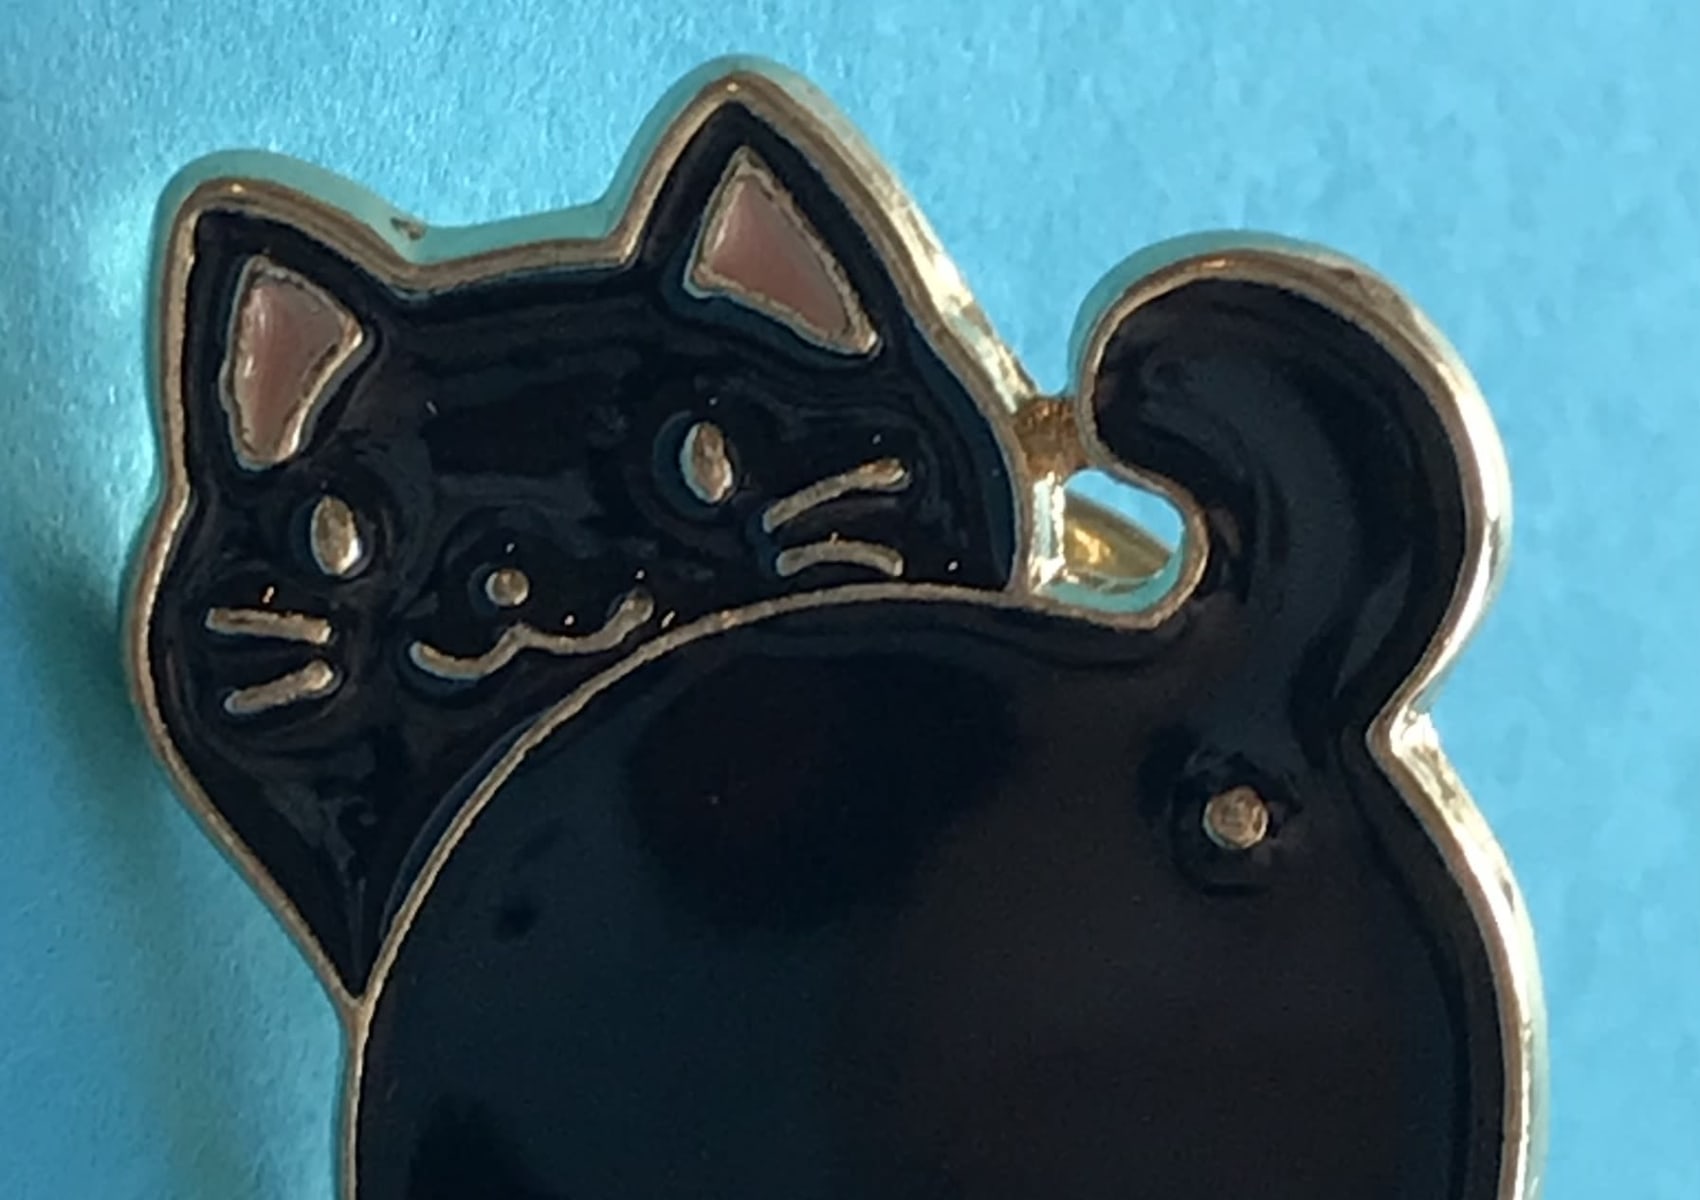 Black cat butt pin badge for sale at Yorkshire Cat Rescue